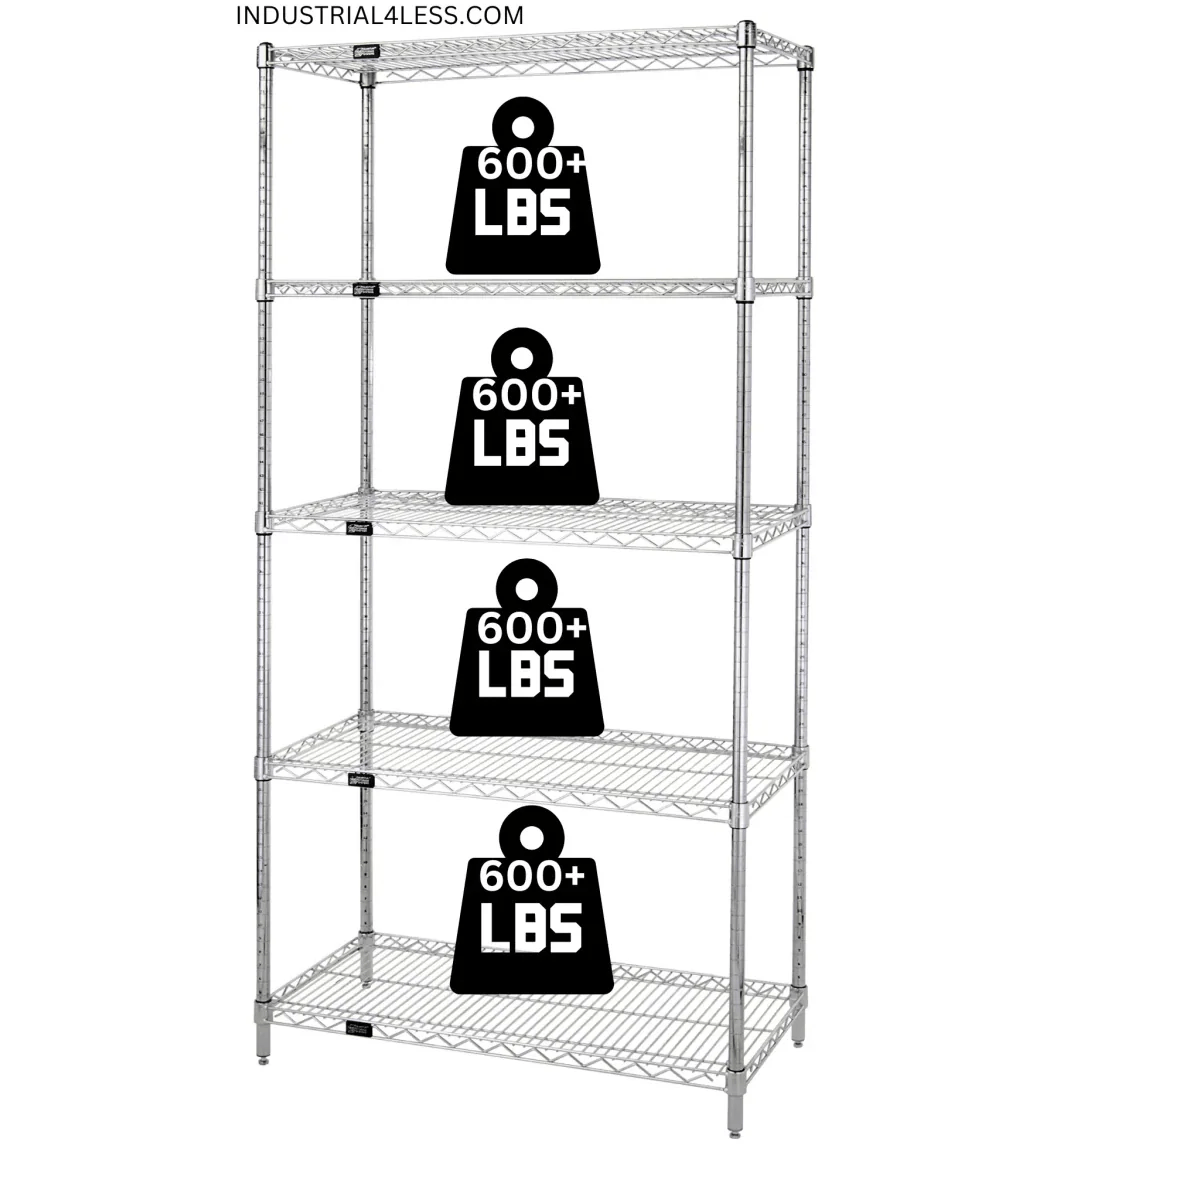 14" x 60" Stainless Steel Wire Shelving Unit - Industrial 4 Less - 14605S-5